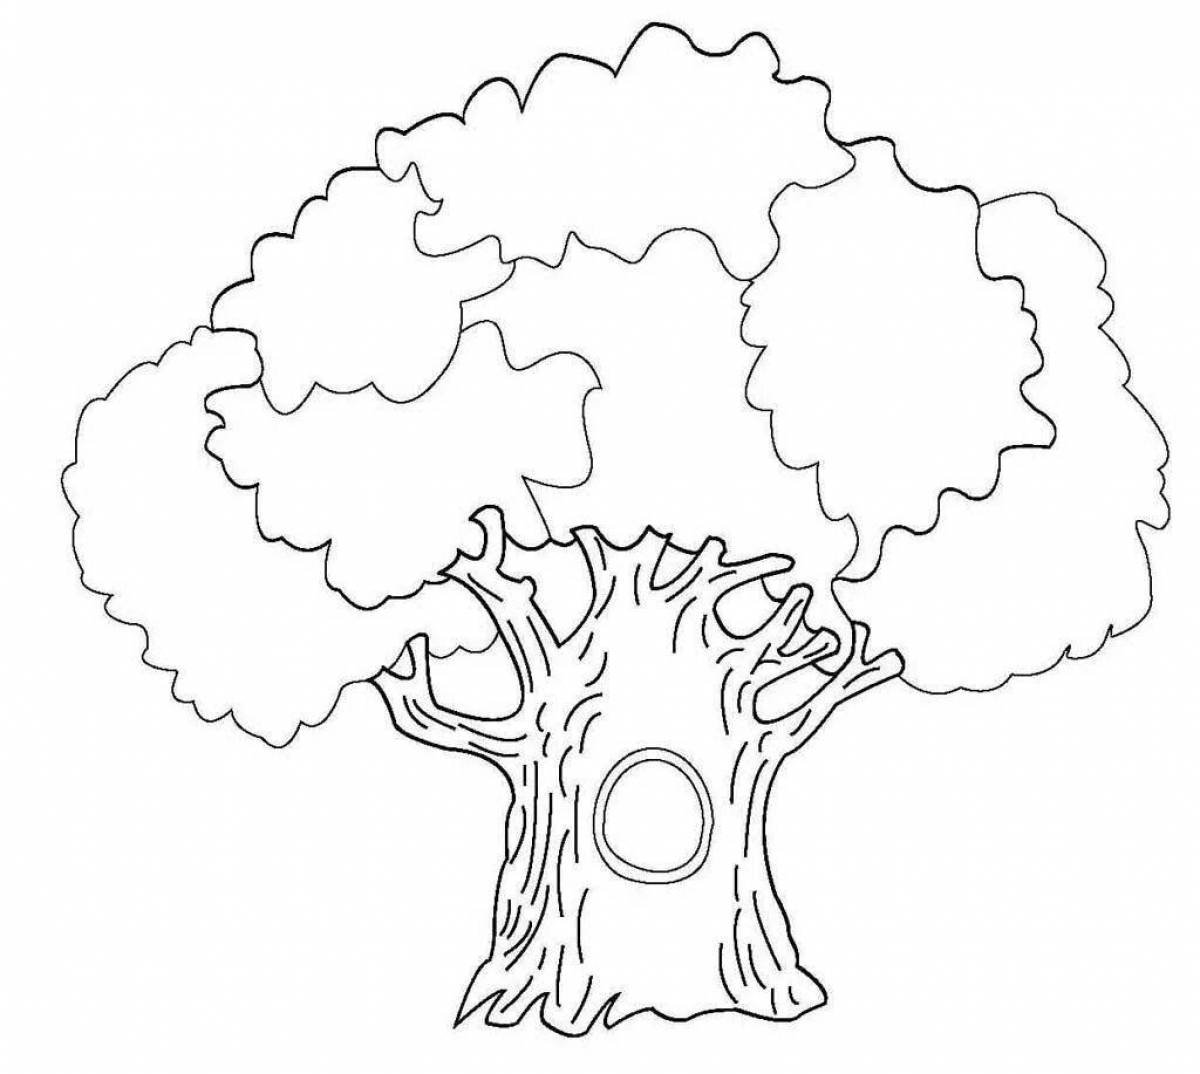 Magic tree pattern coloring page